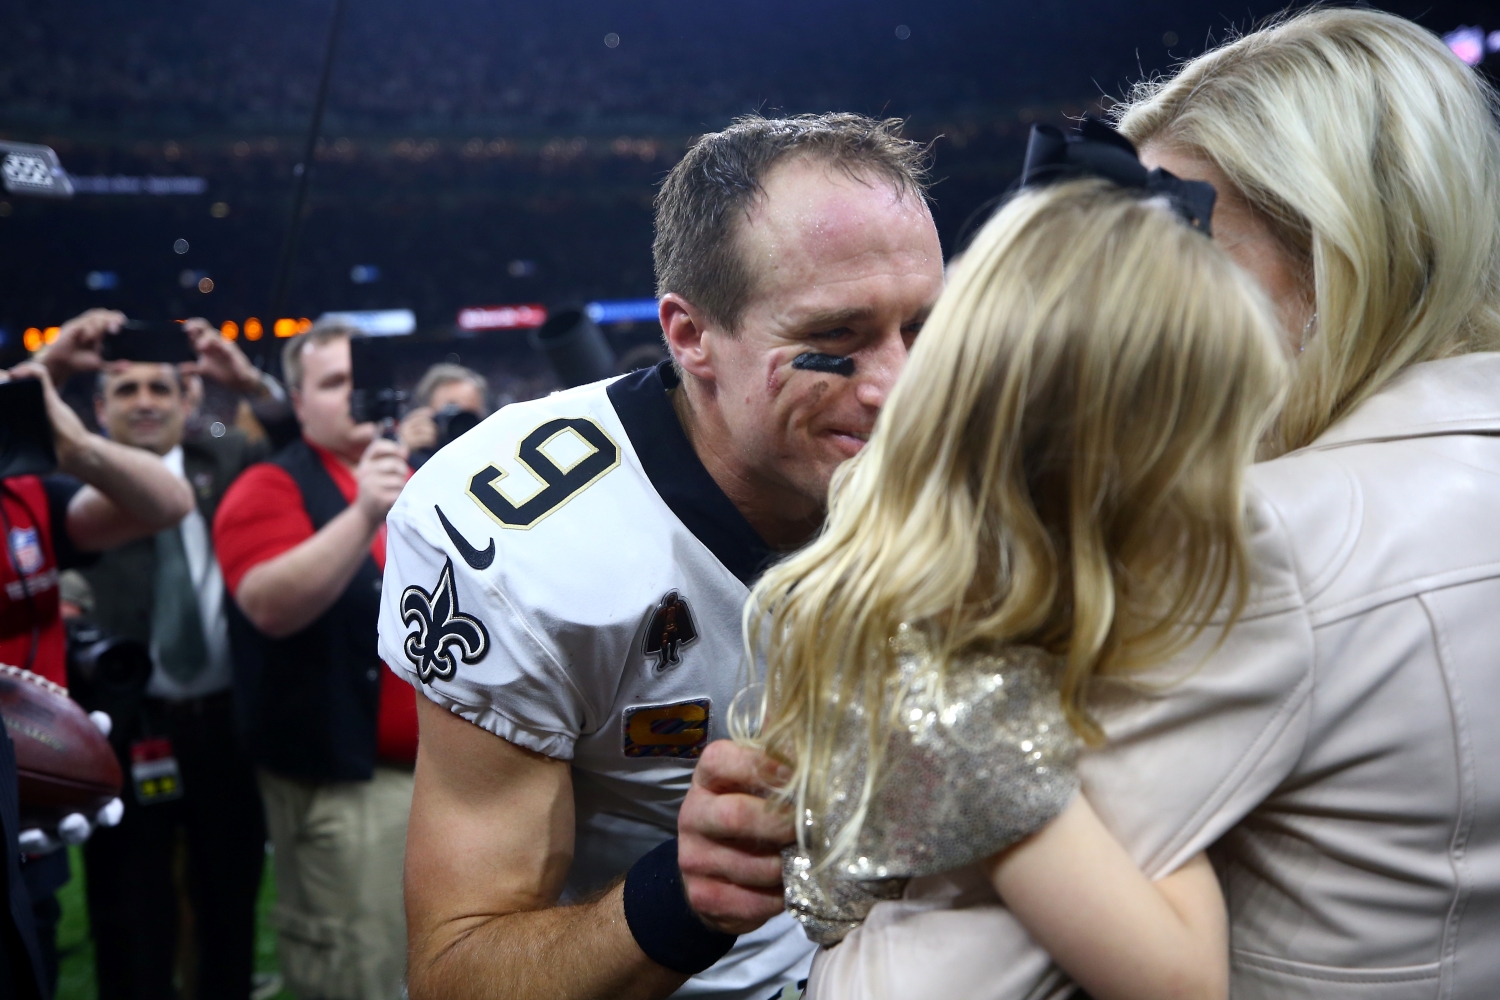 New Orleans Saints quarterback Drew Brees celebrates with his family after he broke the NFL's all-time passing yards record on Oct. 8, 2018.